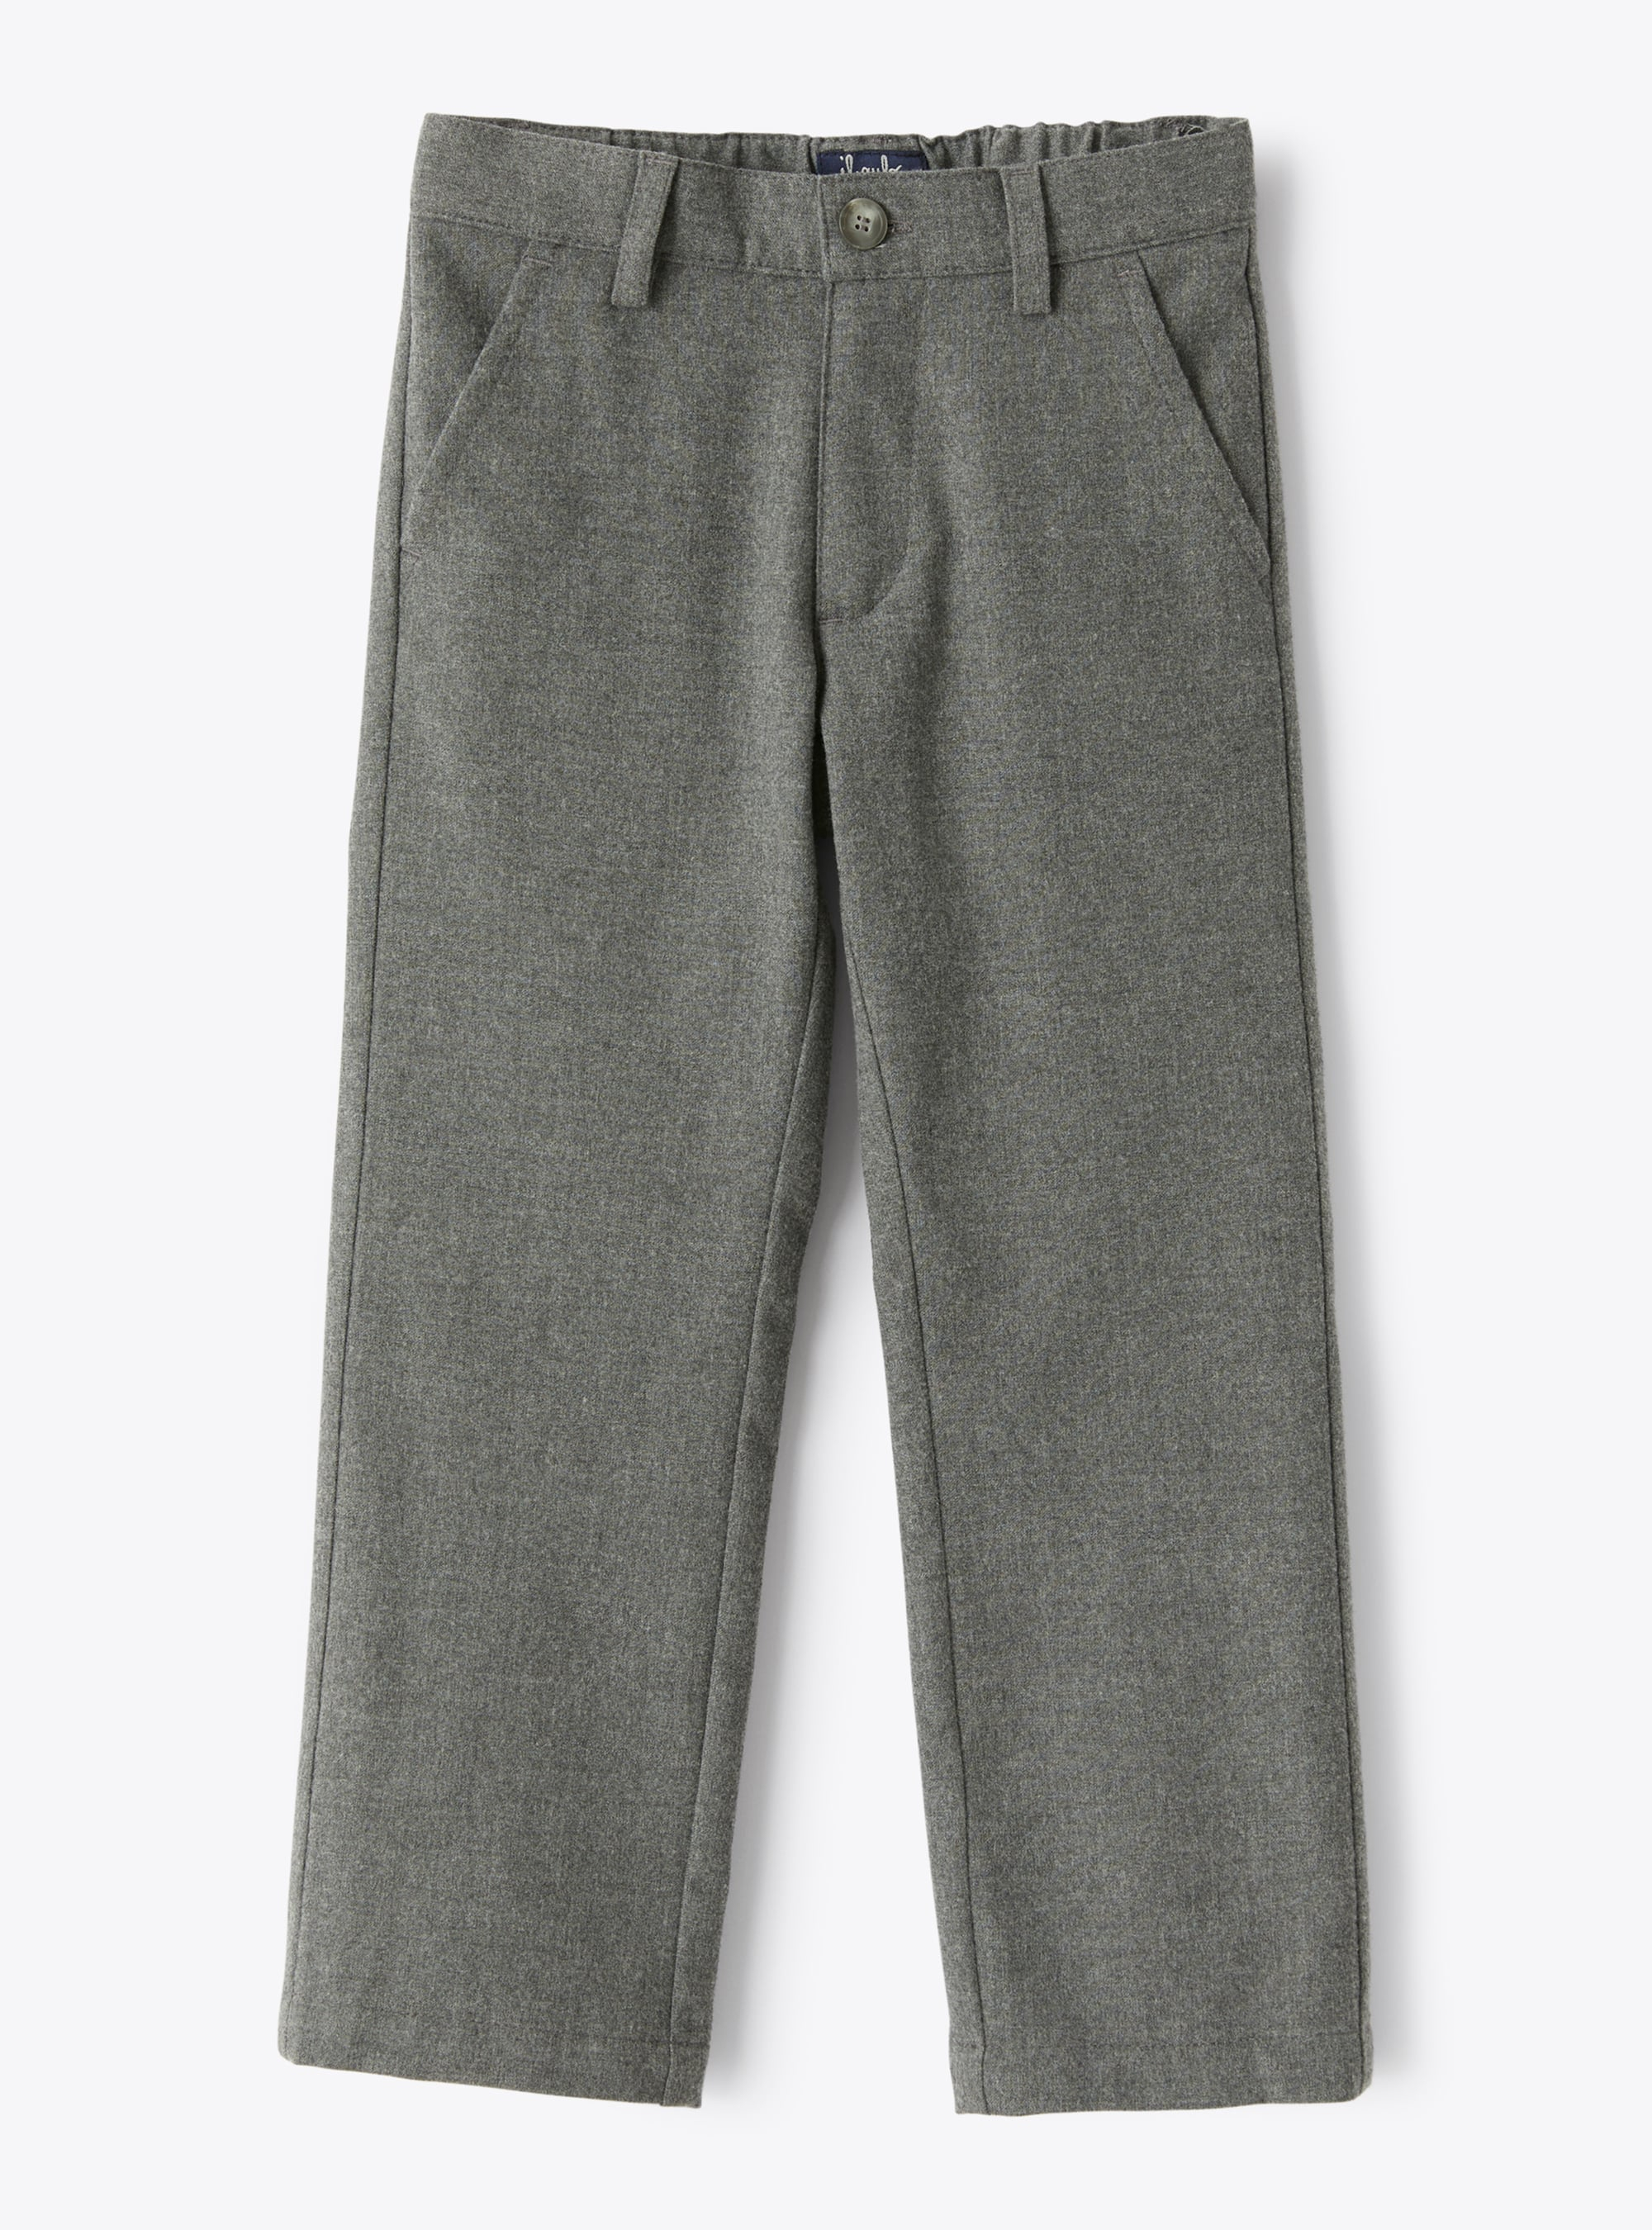 Classic-style trousers in grey technowool - Trousers - Il Gufo